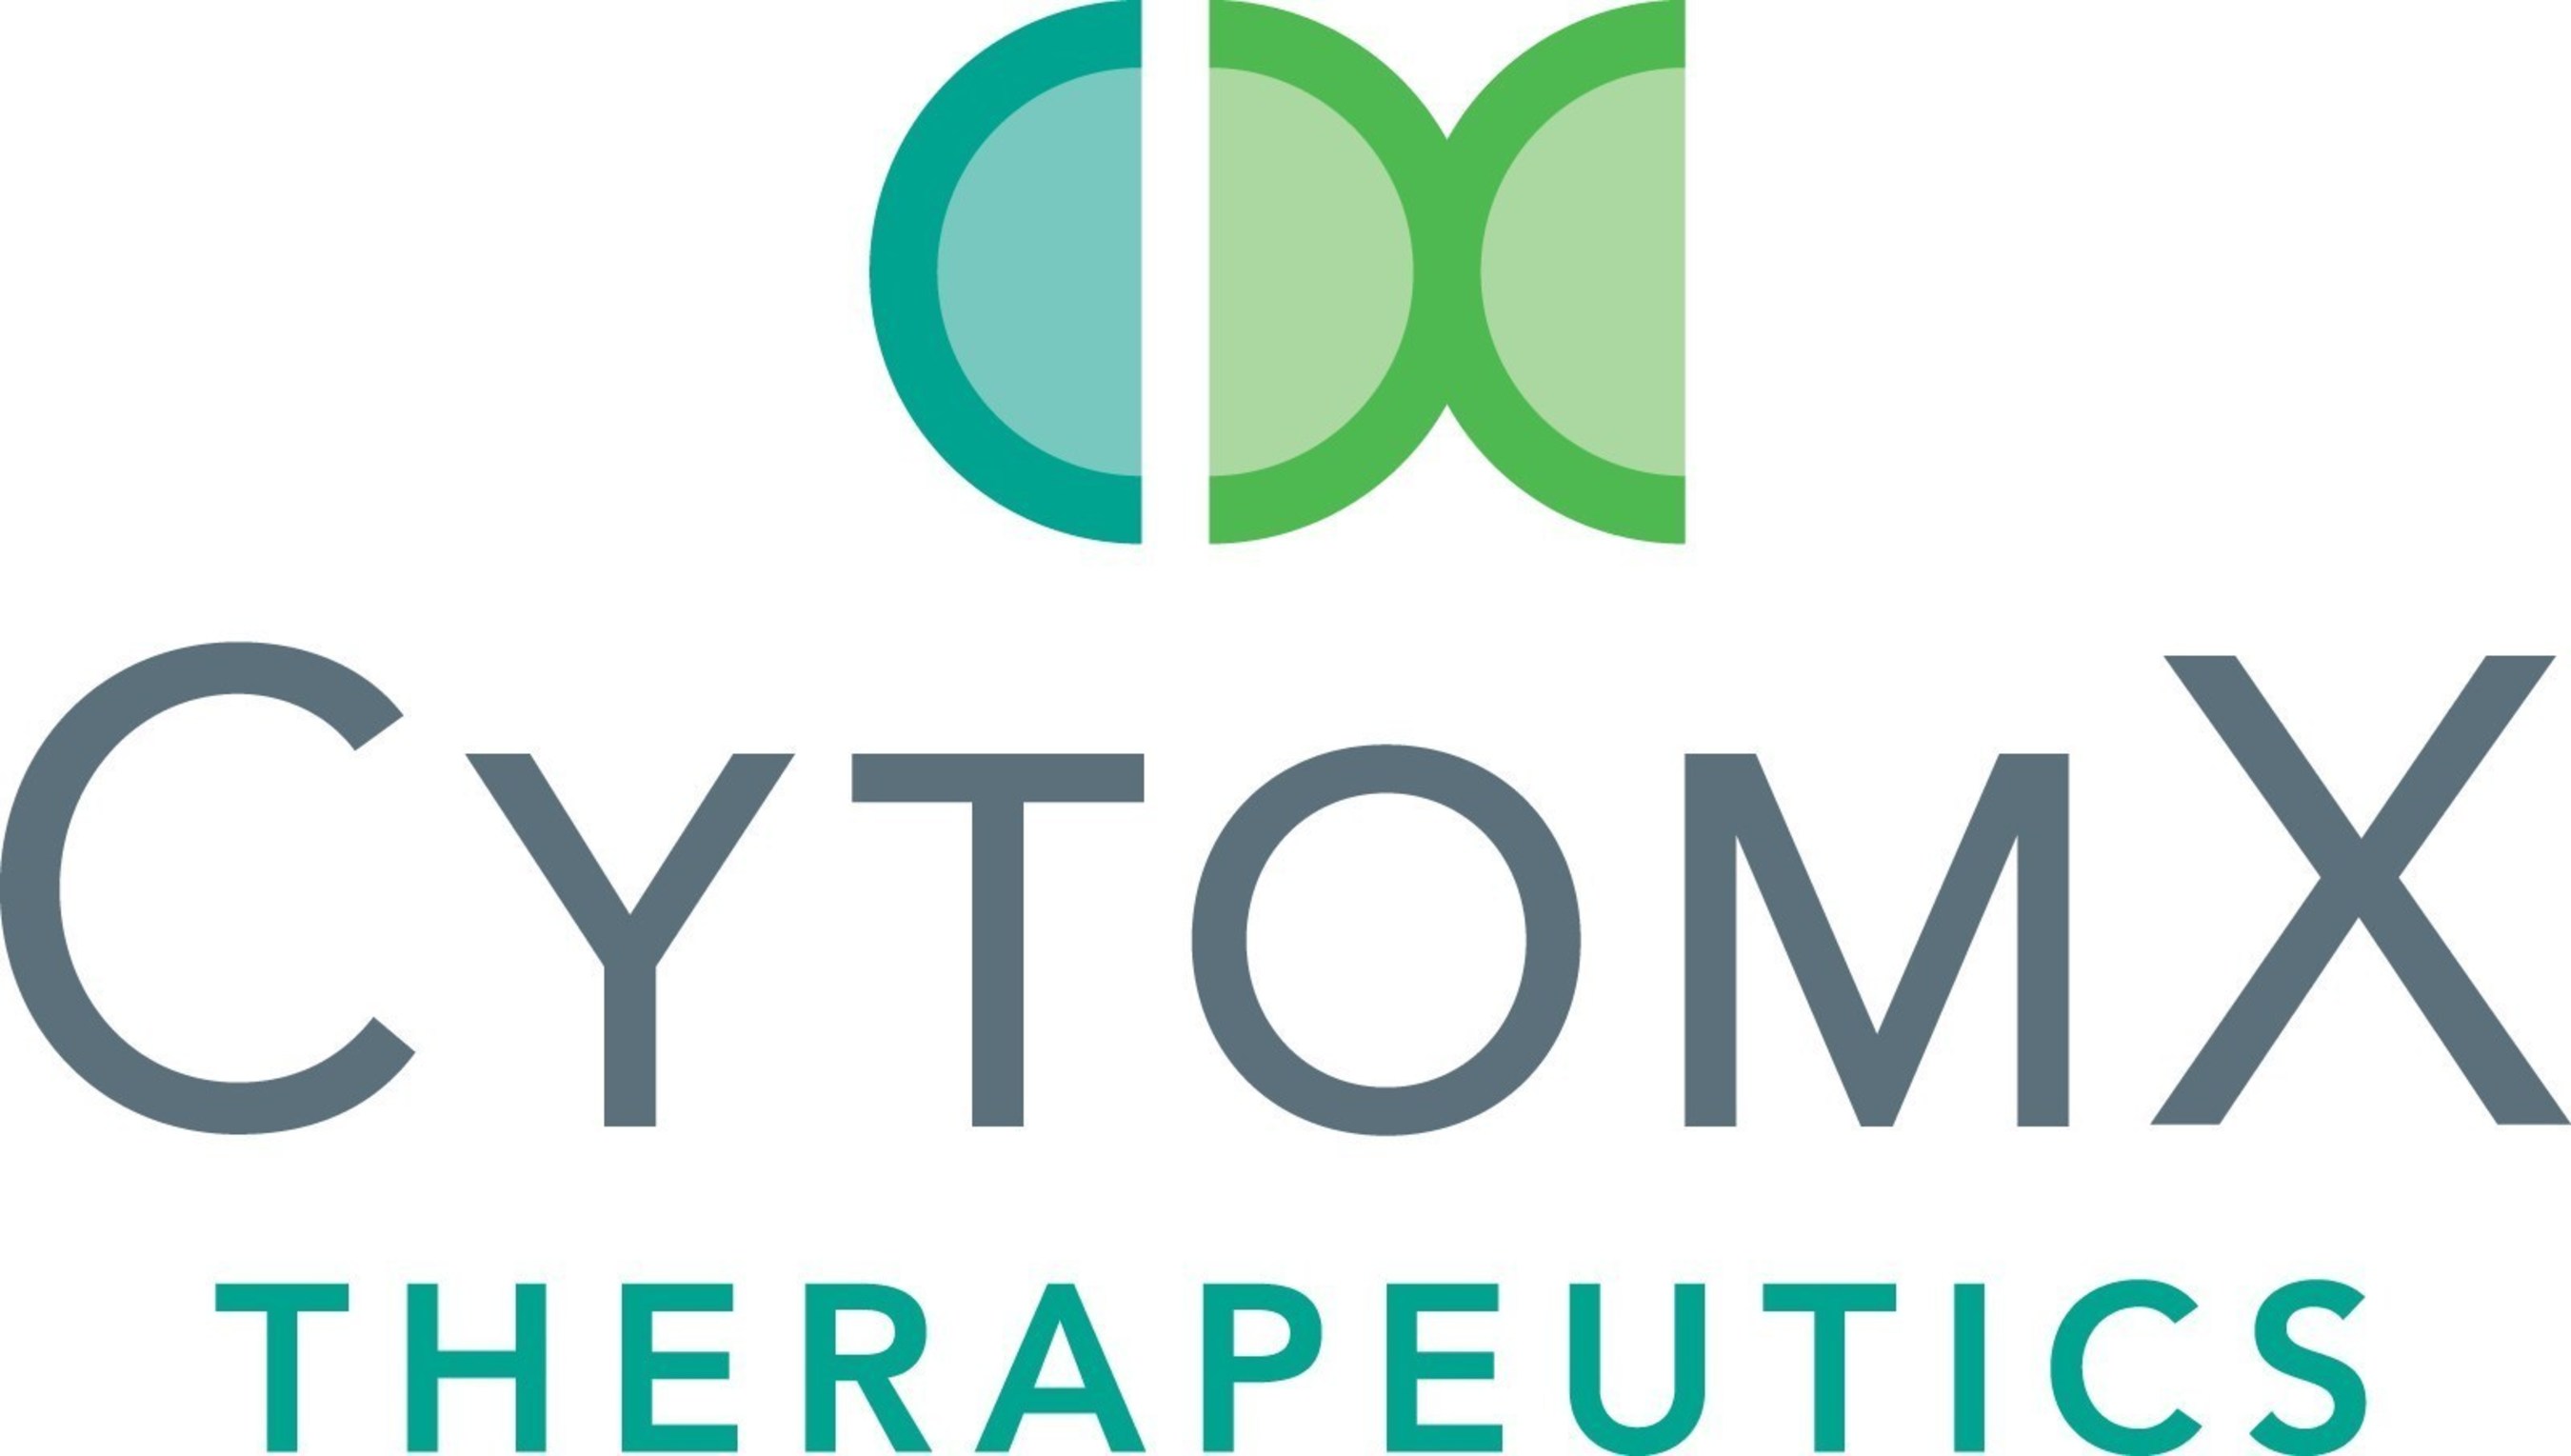 CytomX Therapeutics is developing a pipeline of Probody(TM) therapeutics for cancer.